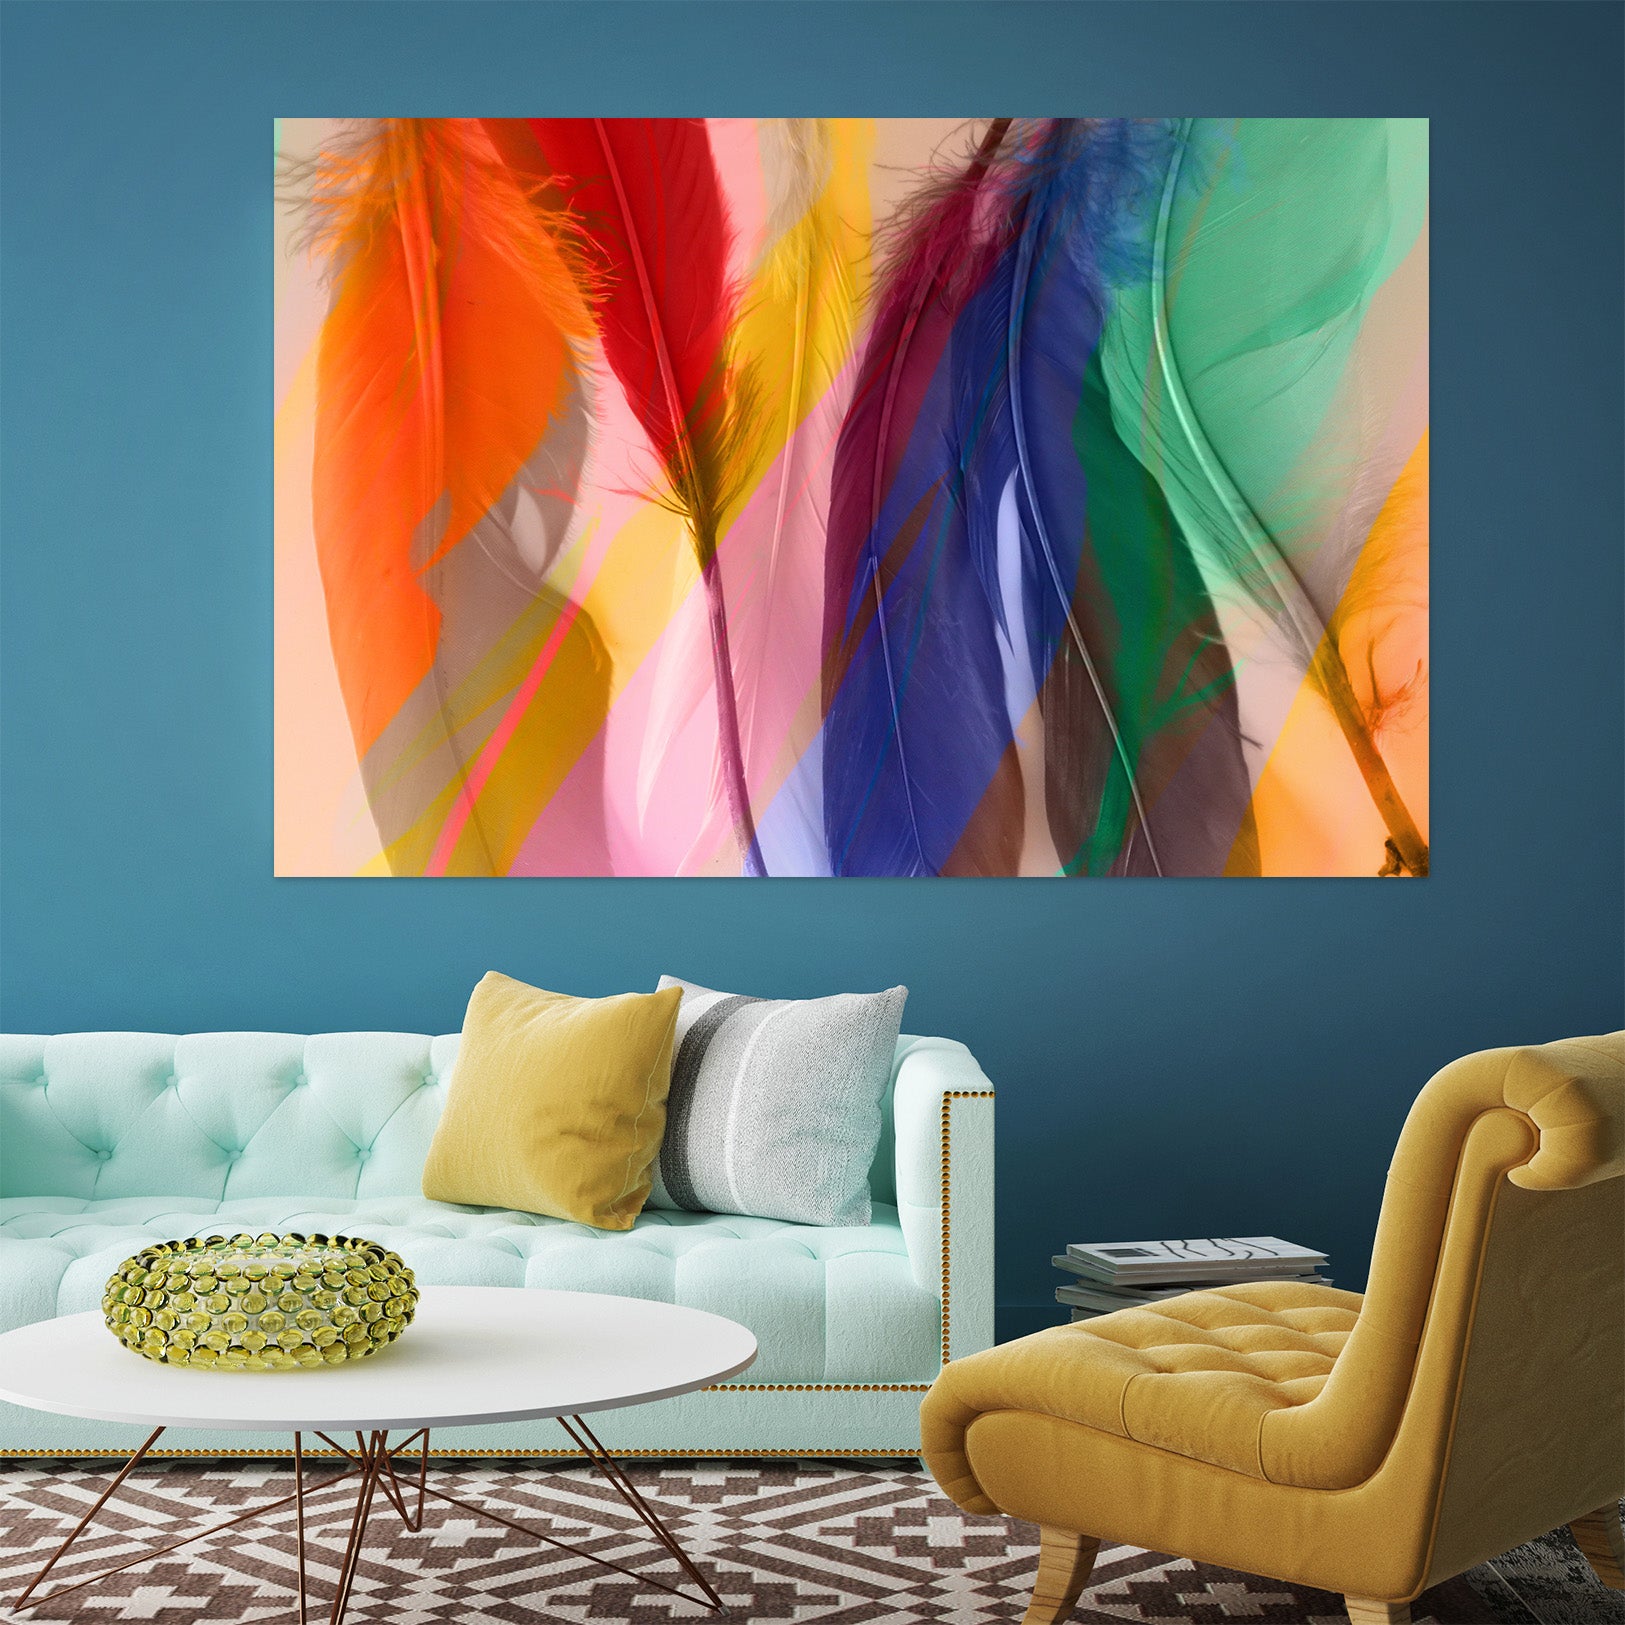 3D Colored Feathers 71113 Shandra Smith Wall Sticker